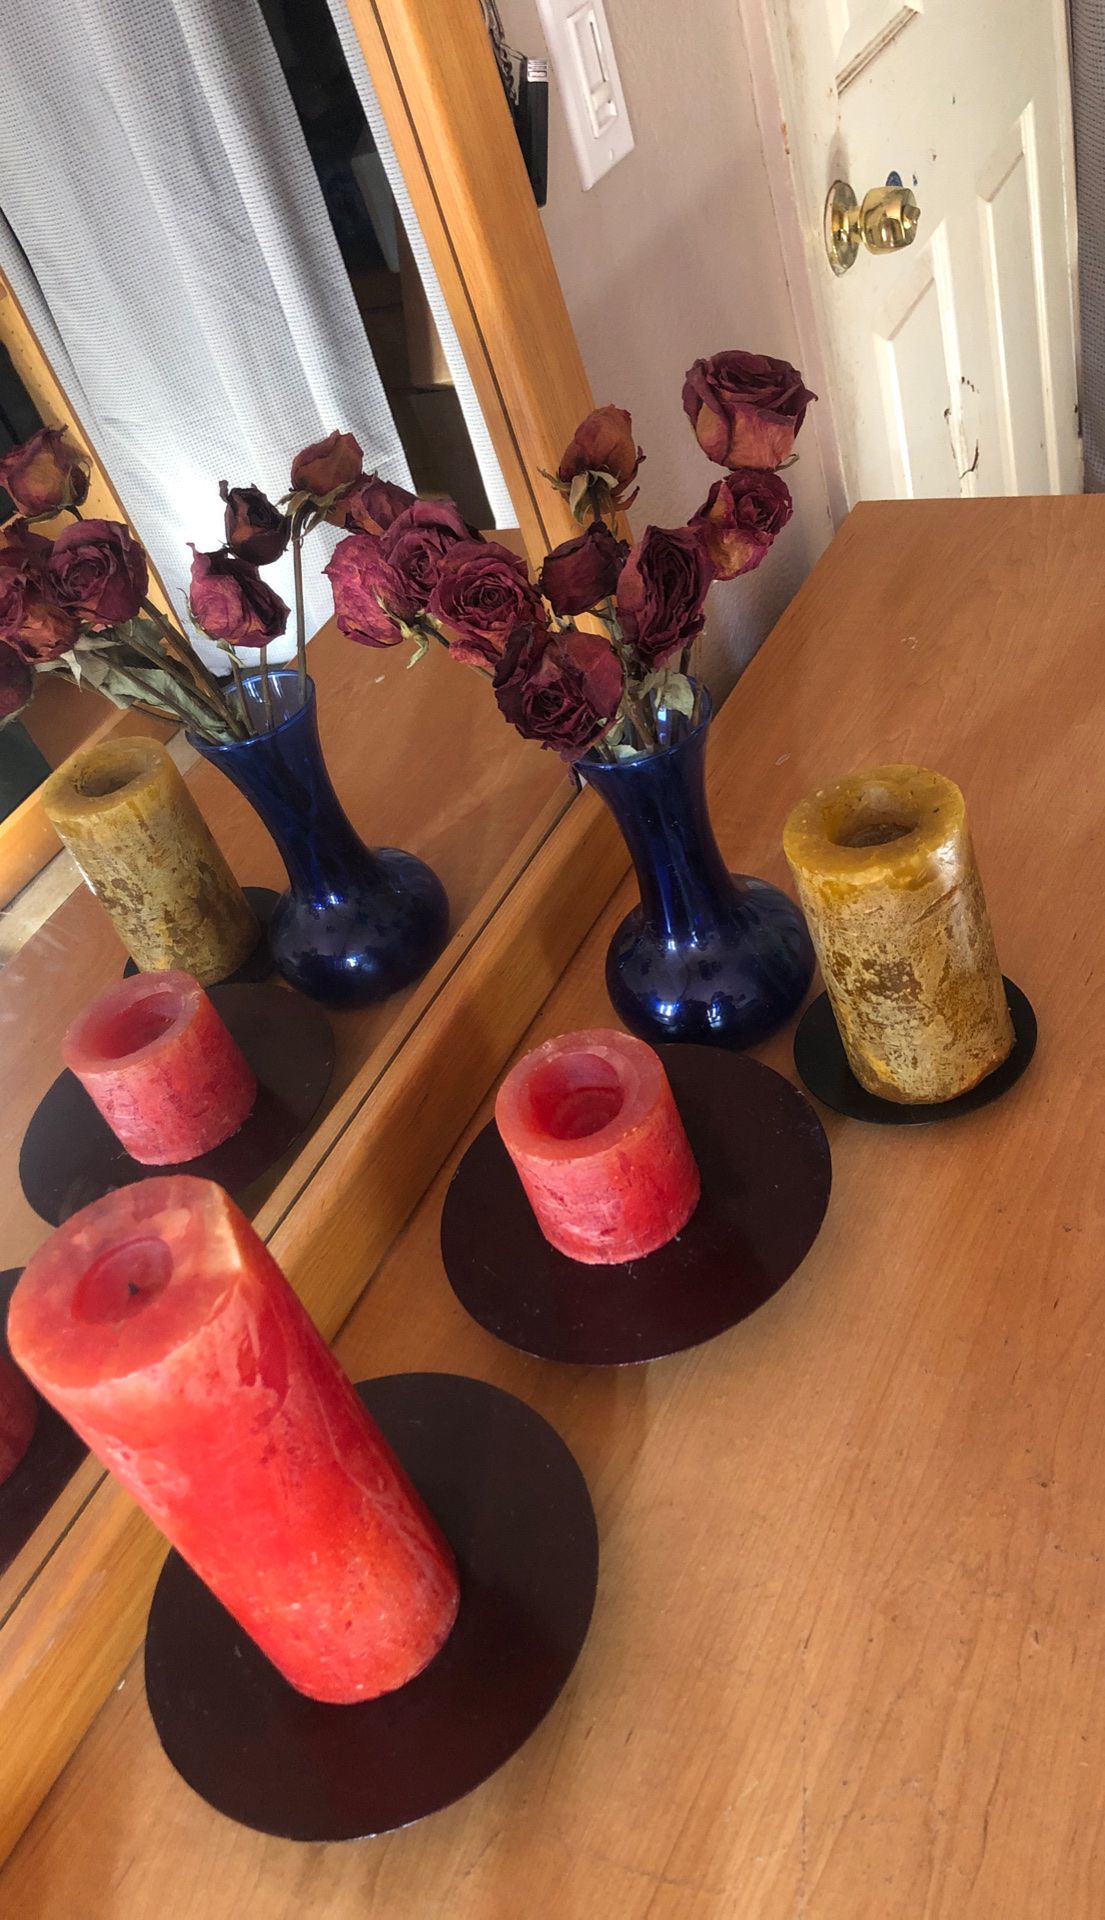 Candles and vase decorations